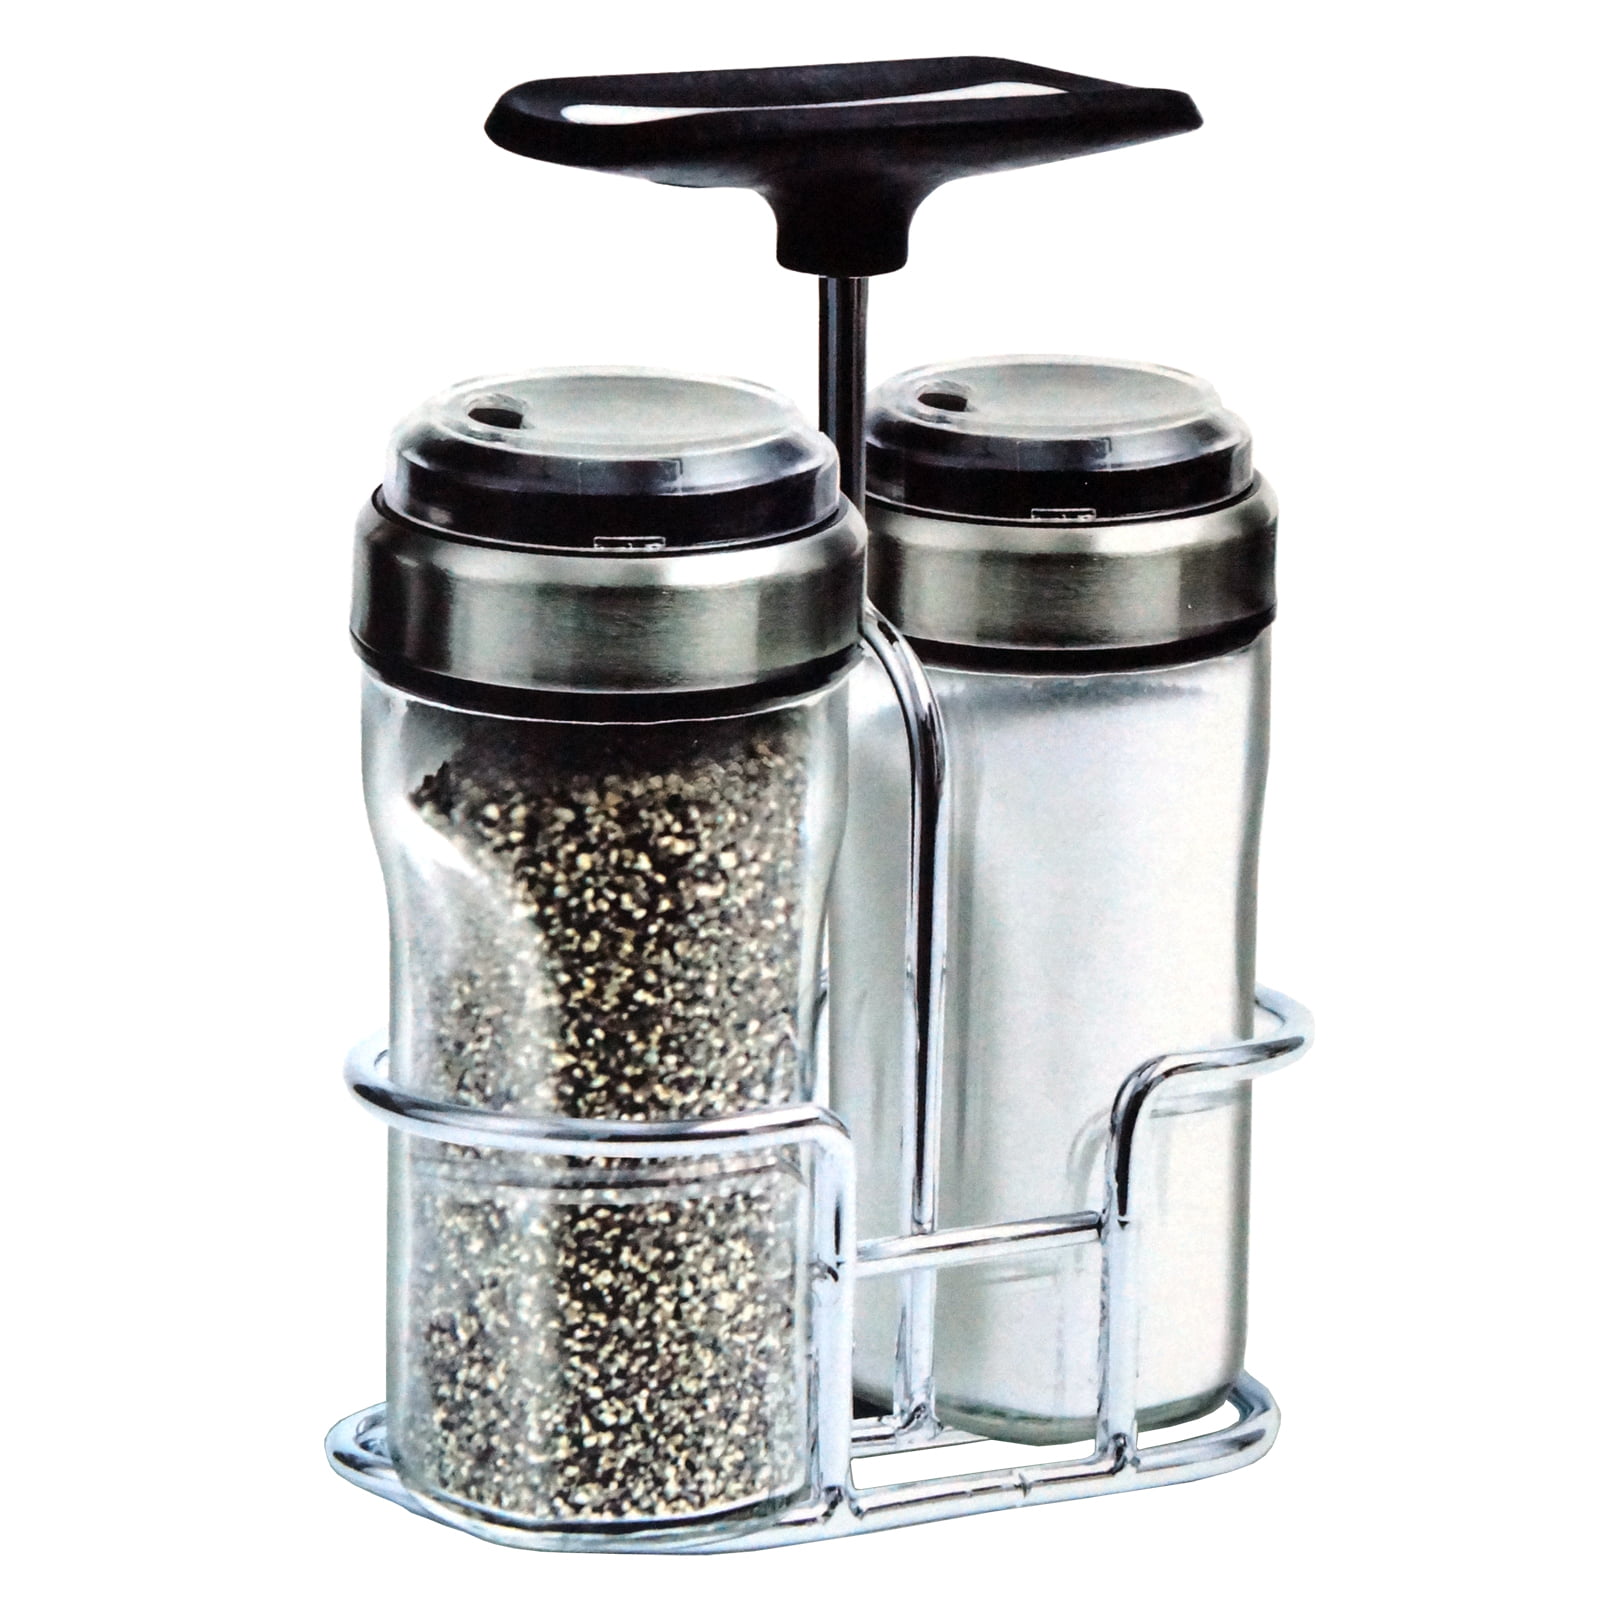 Salt Pepper Glass Shakers Stainless Steel Top Lid & Stand - Sugar Spice Glass Salt And Pepper Shakers With Stainless Steel Tops